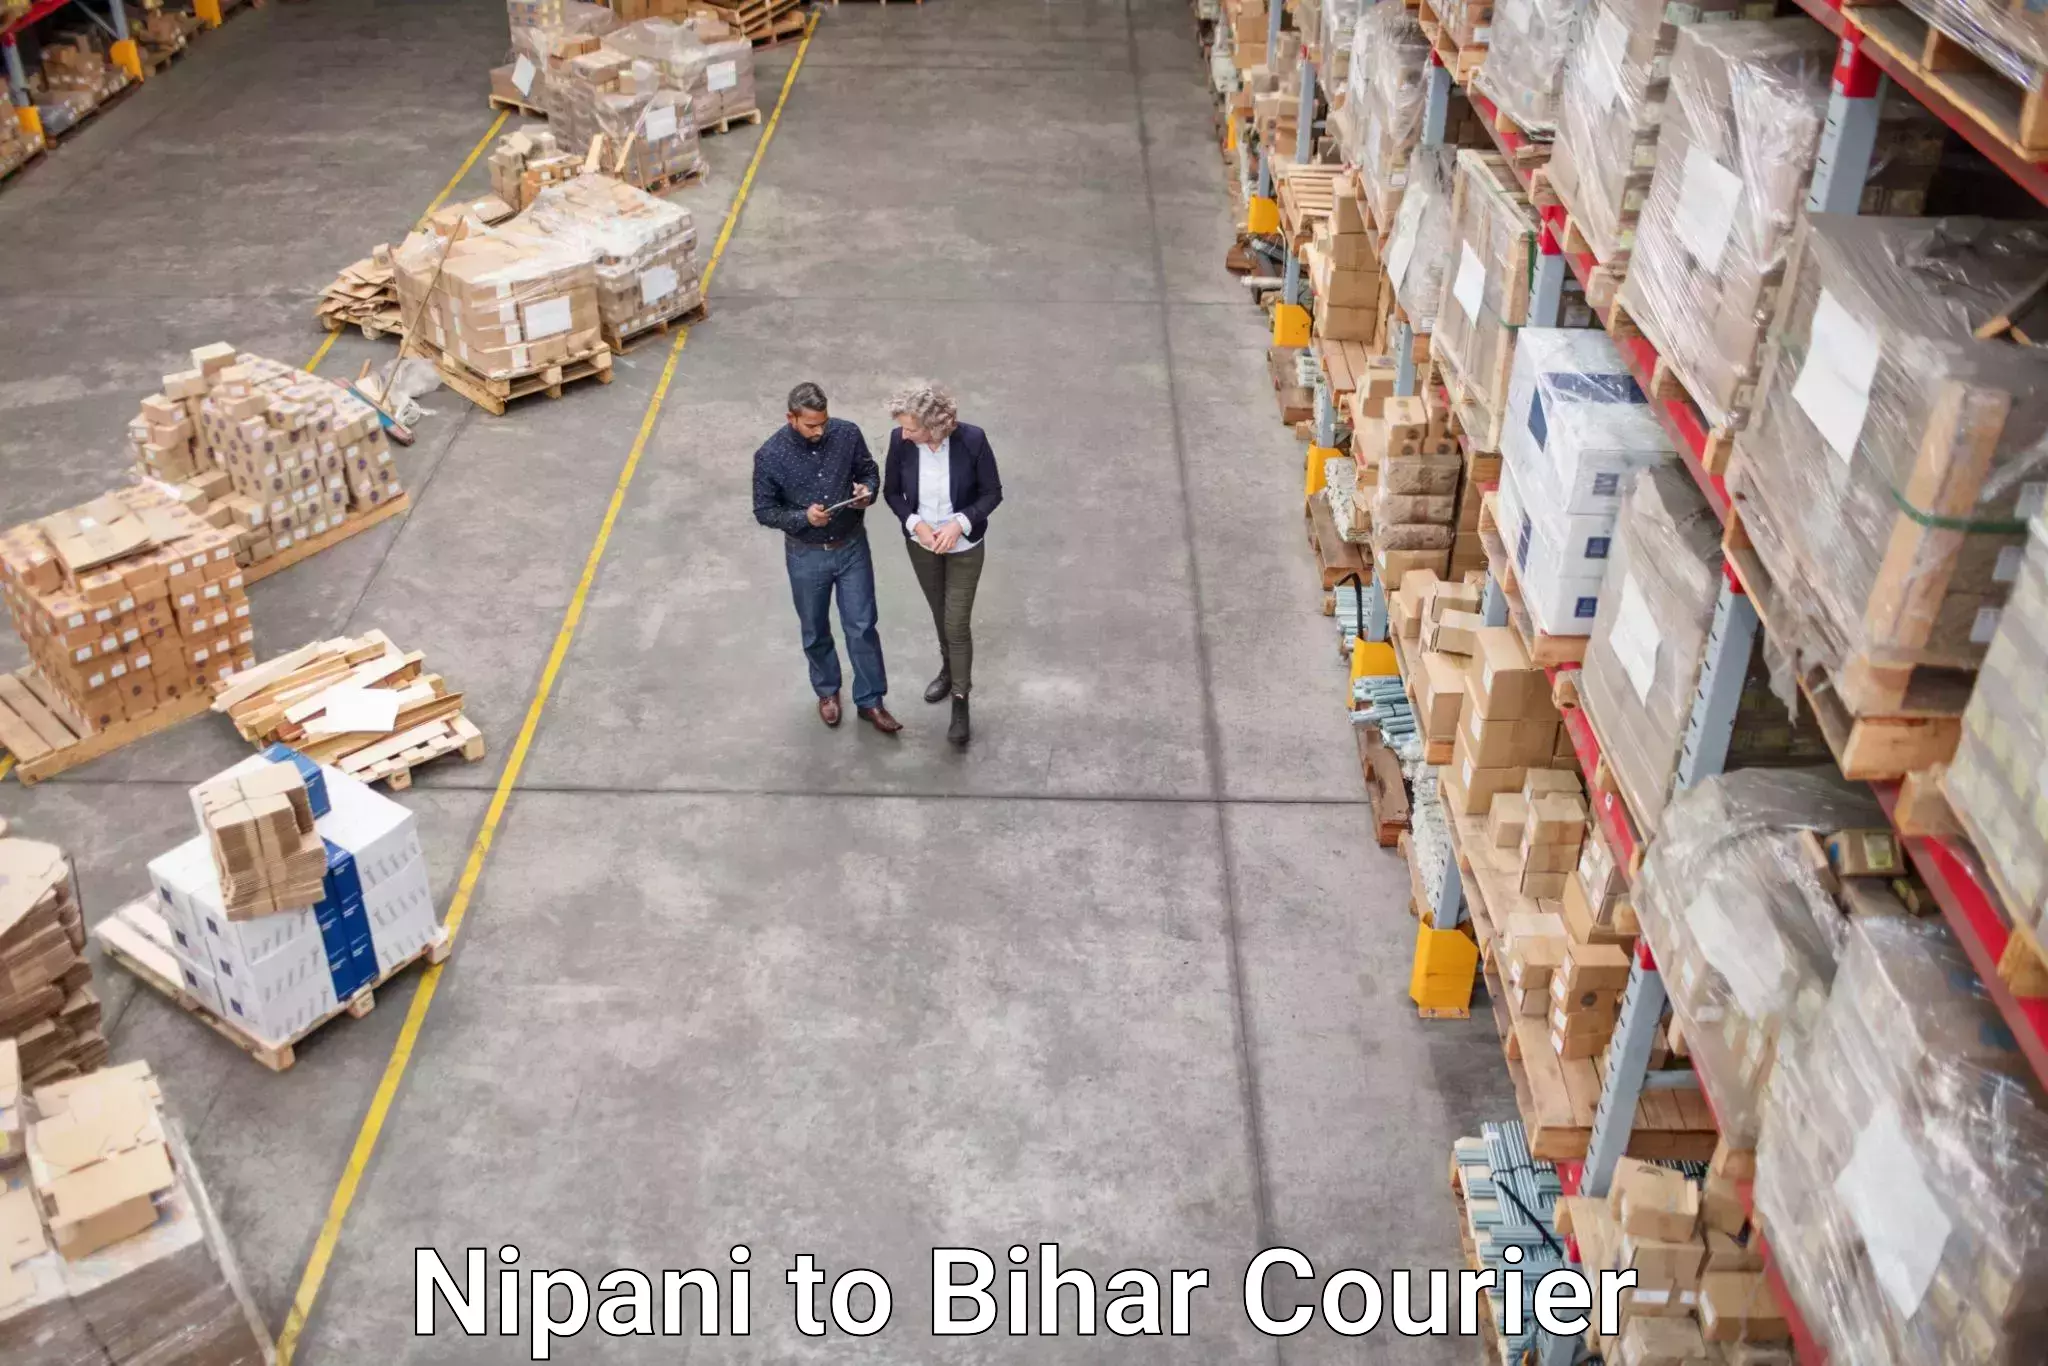 State-of-the-art courier technology Nipani to Bihar